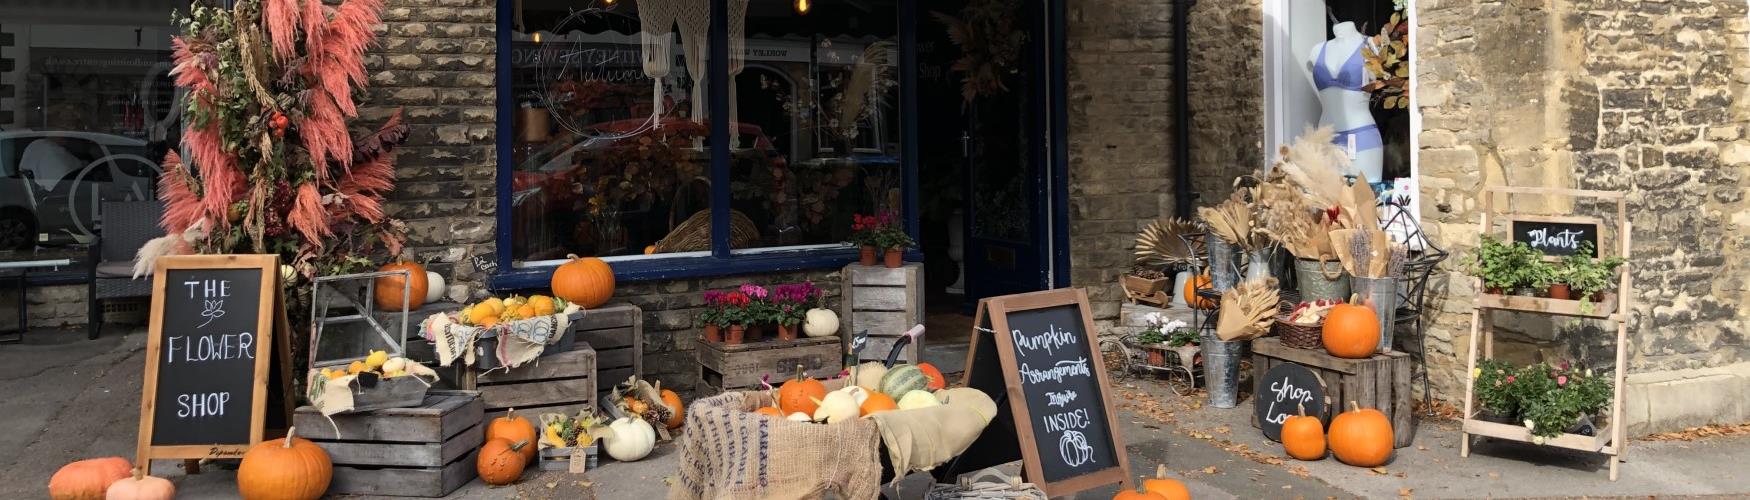 Autumnal display at The Flower Shop in Witney